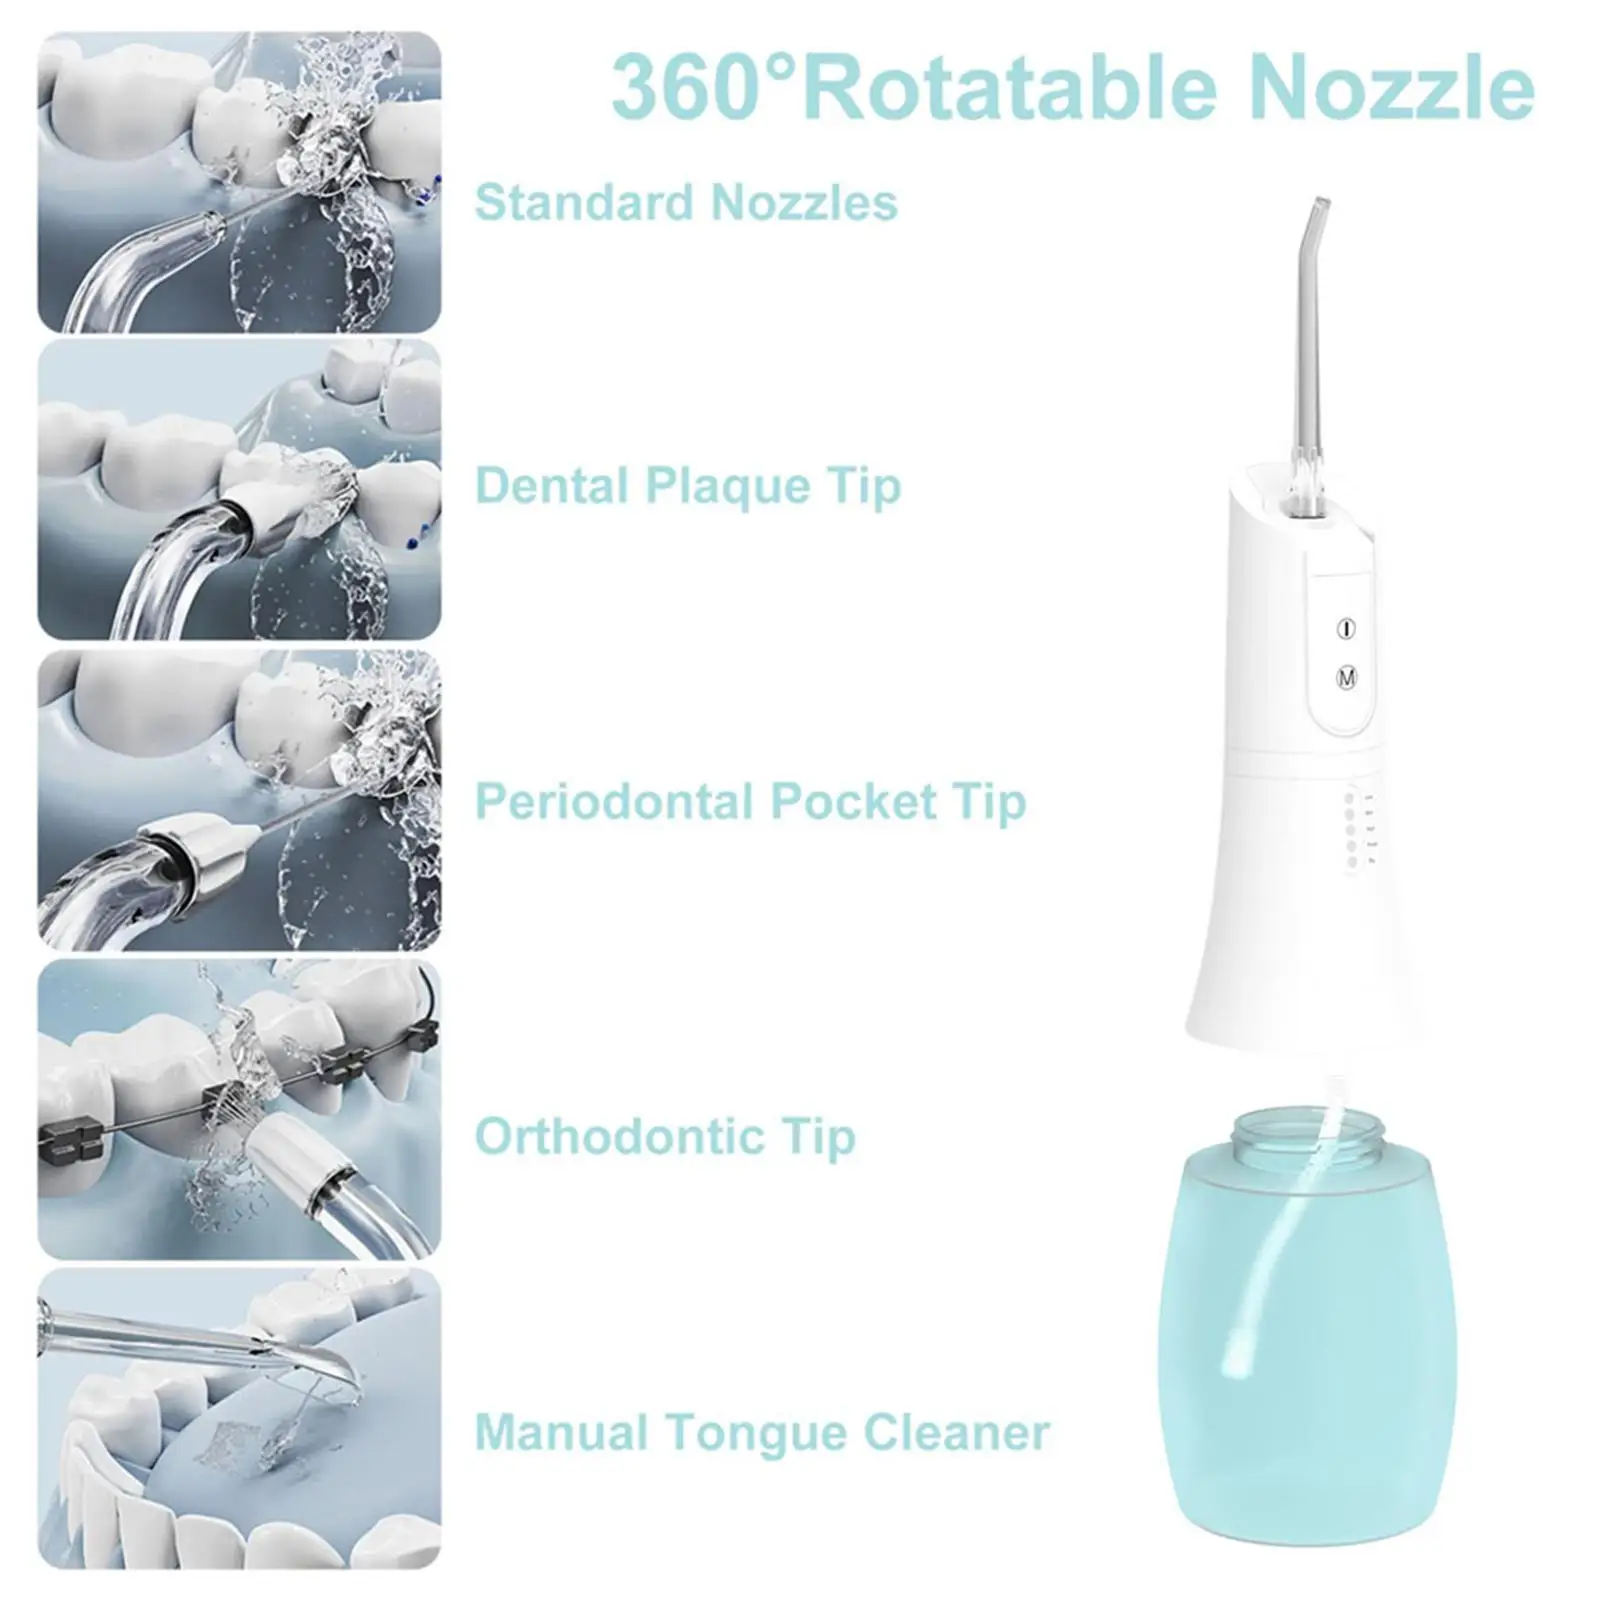 Water Flosser 6 Jet Tips IPX7 Waterproof 400ml Portable Oral Irrigator for Teeth Clean Braces Care Travel Family